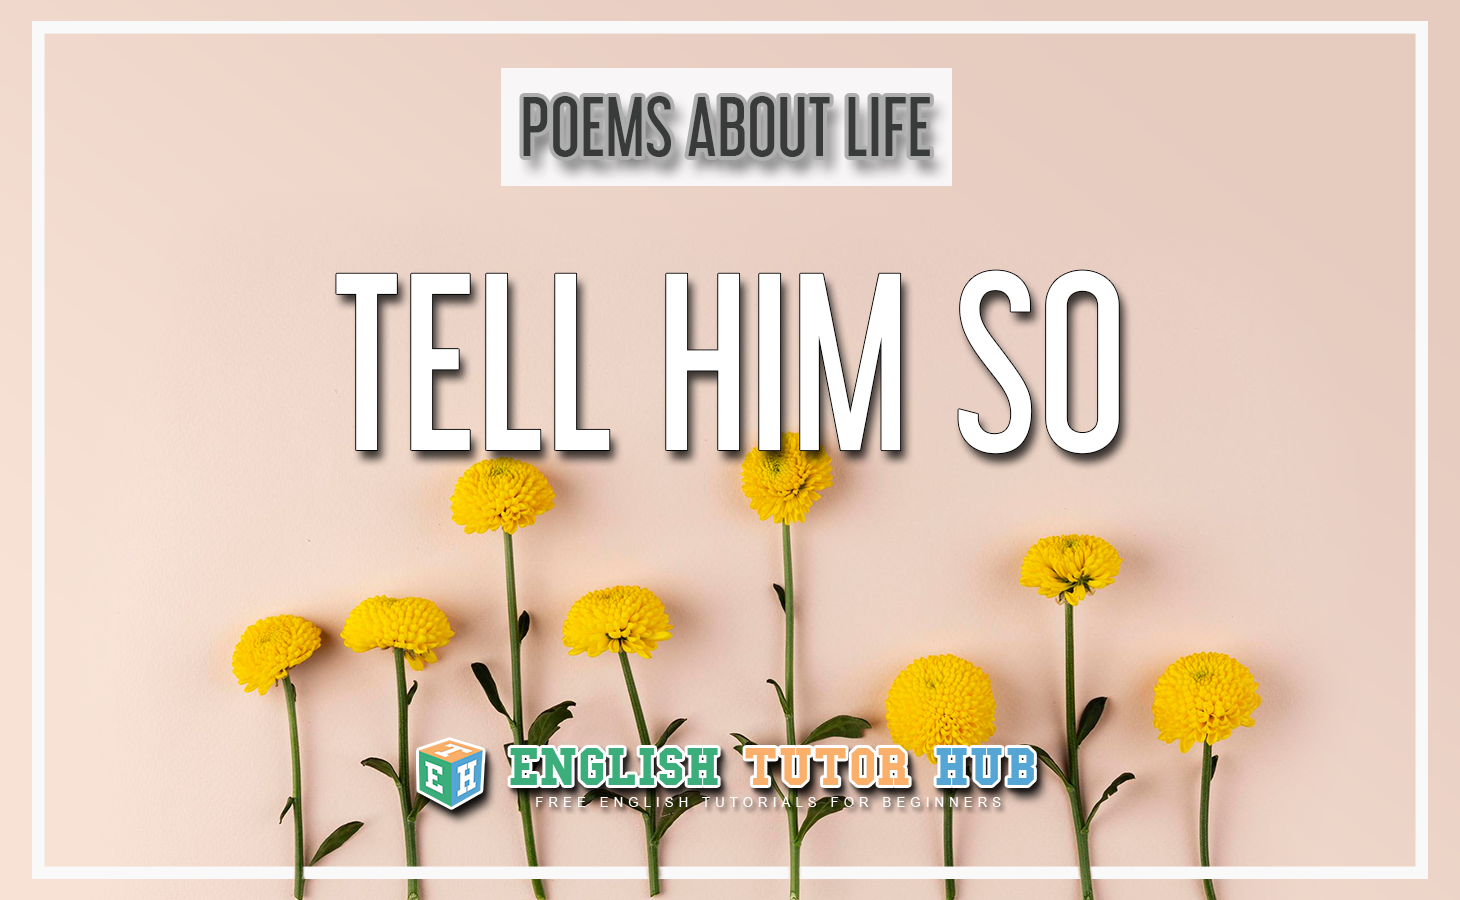 Poems About Life - Tell Him So